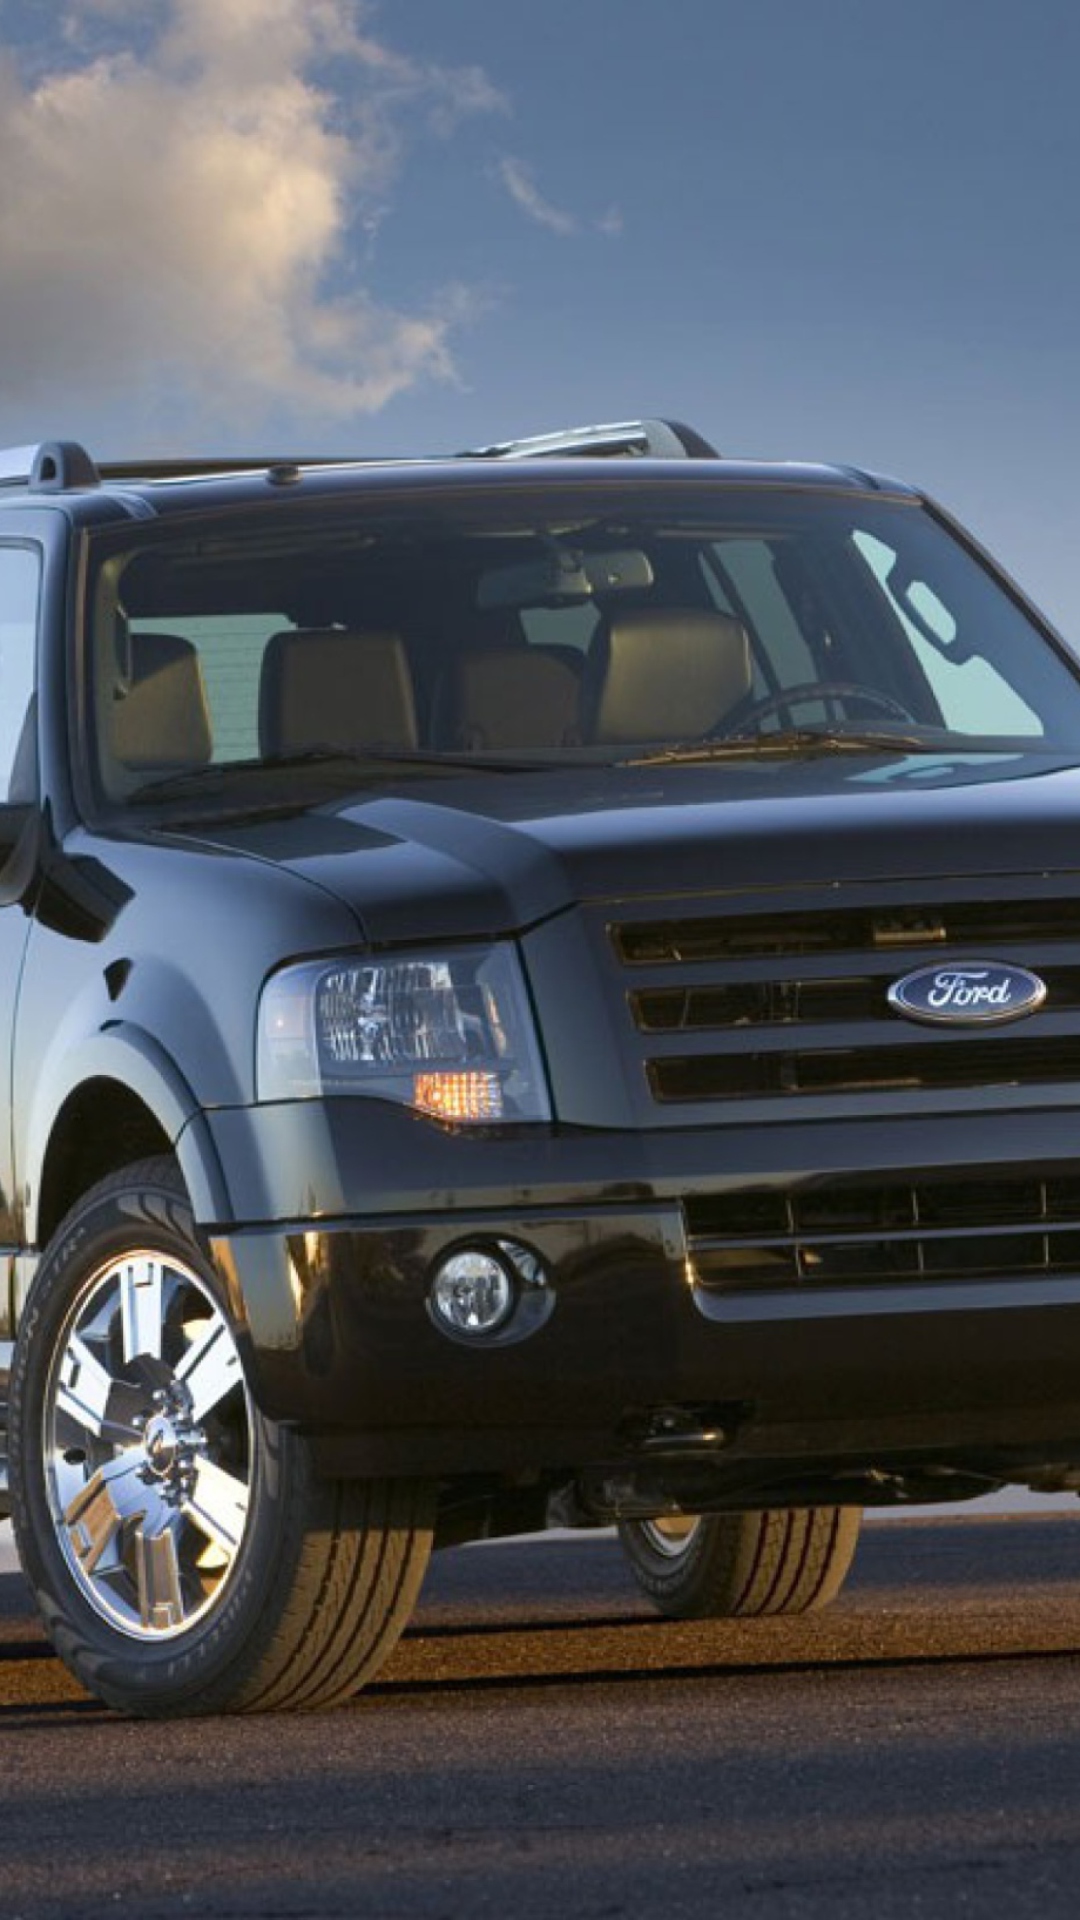 Ford Expedition wallpaper 1080x1920